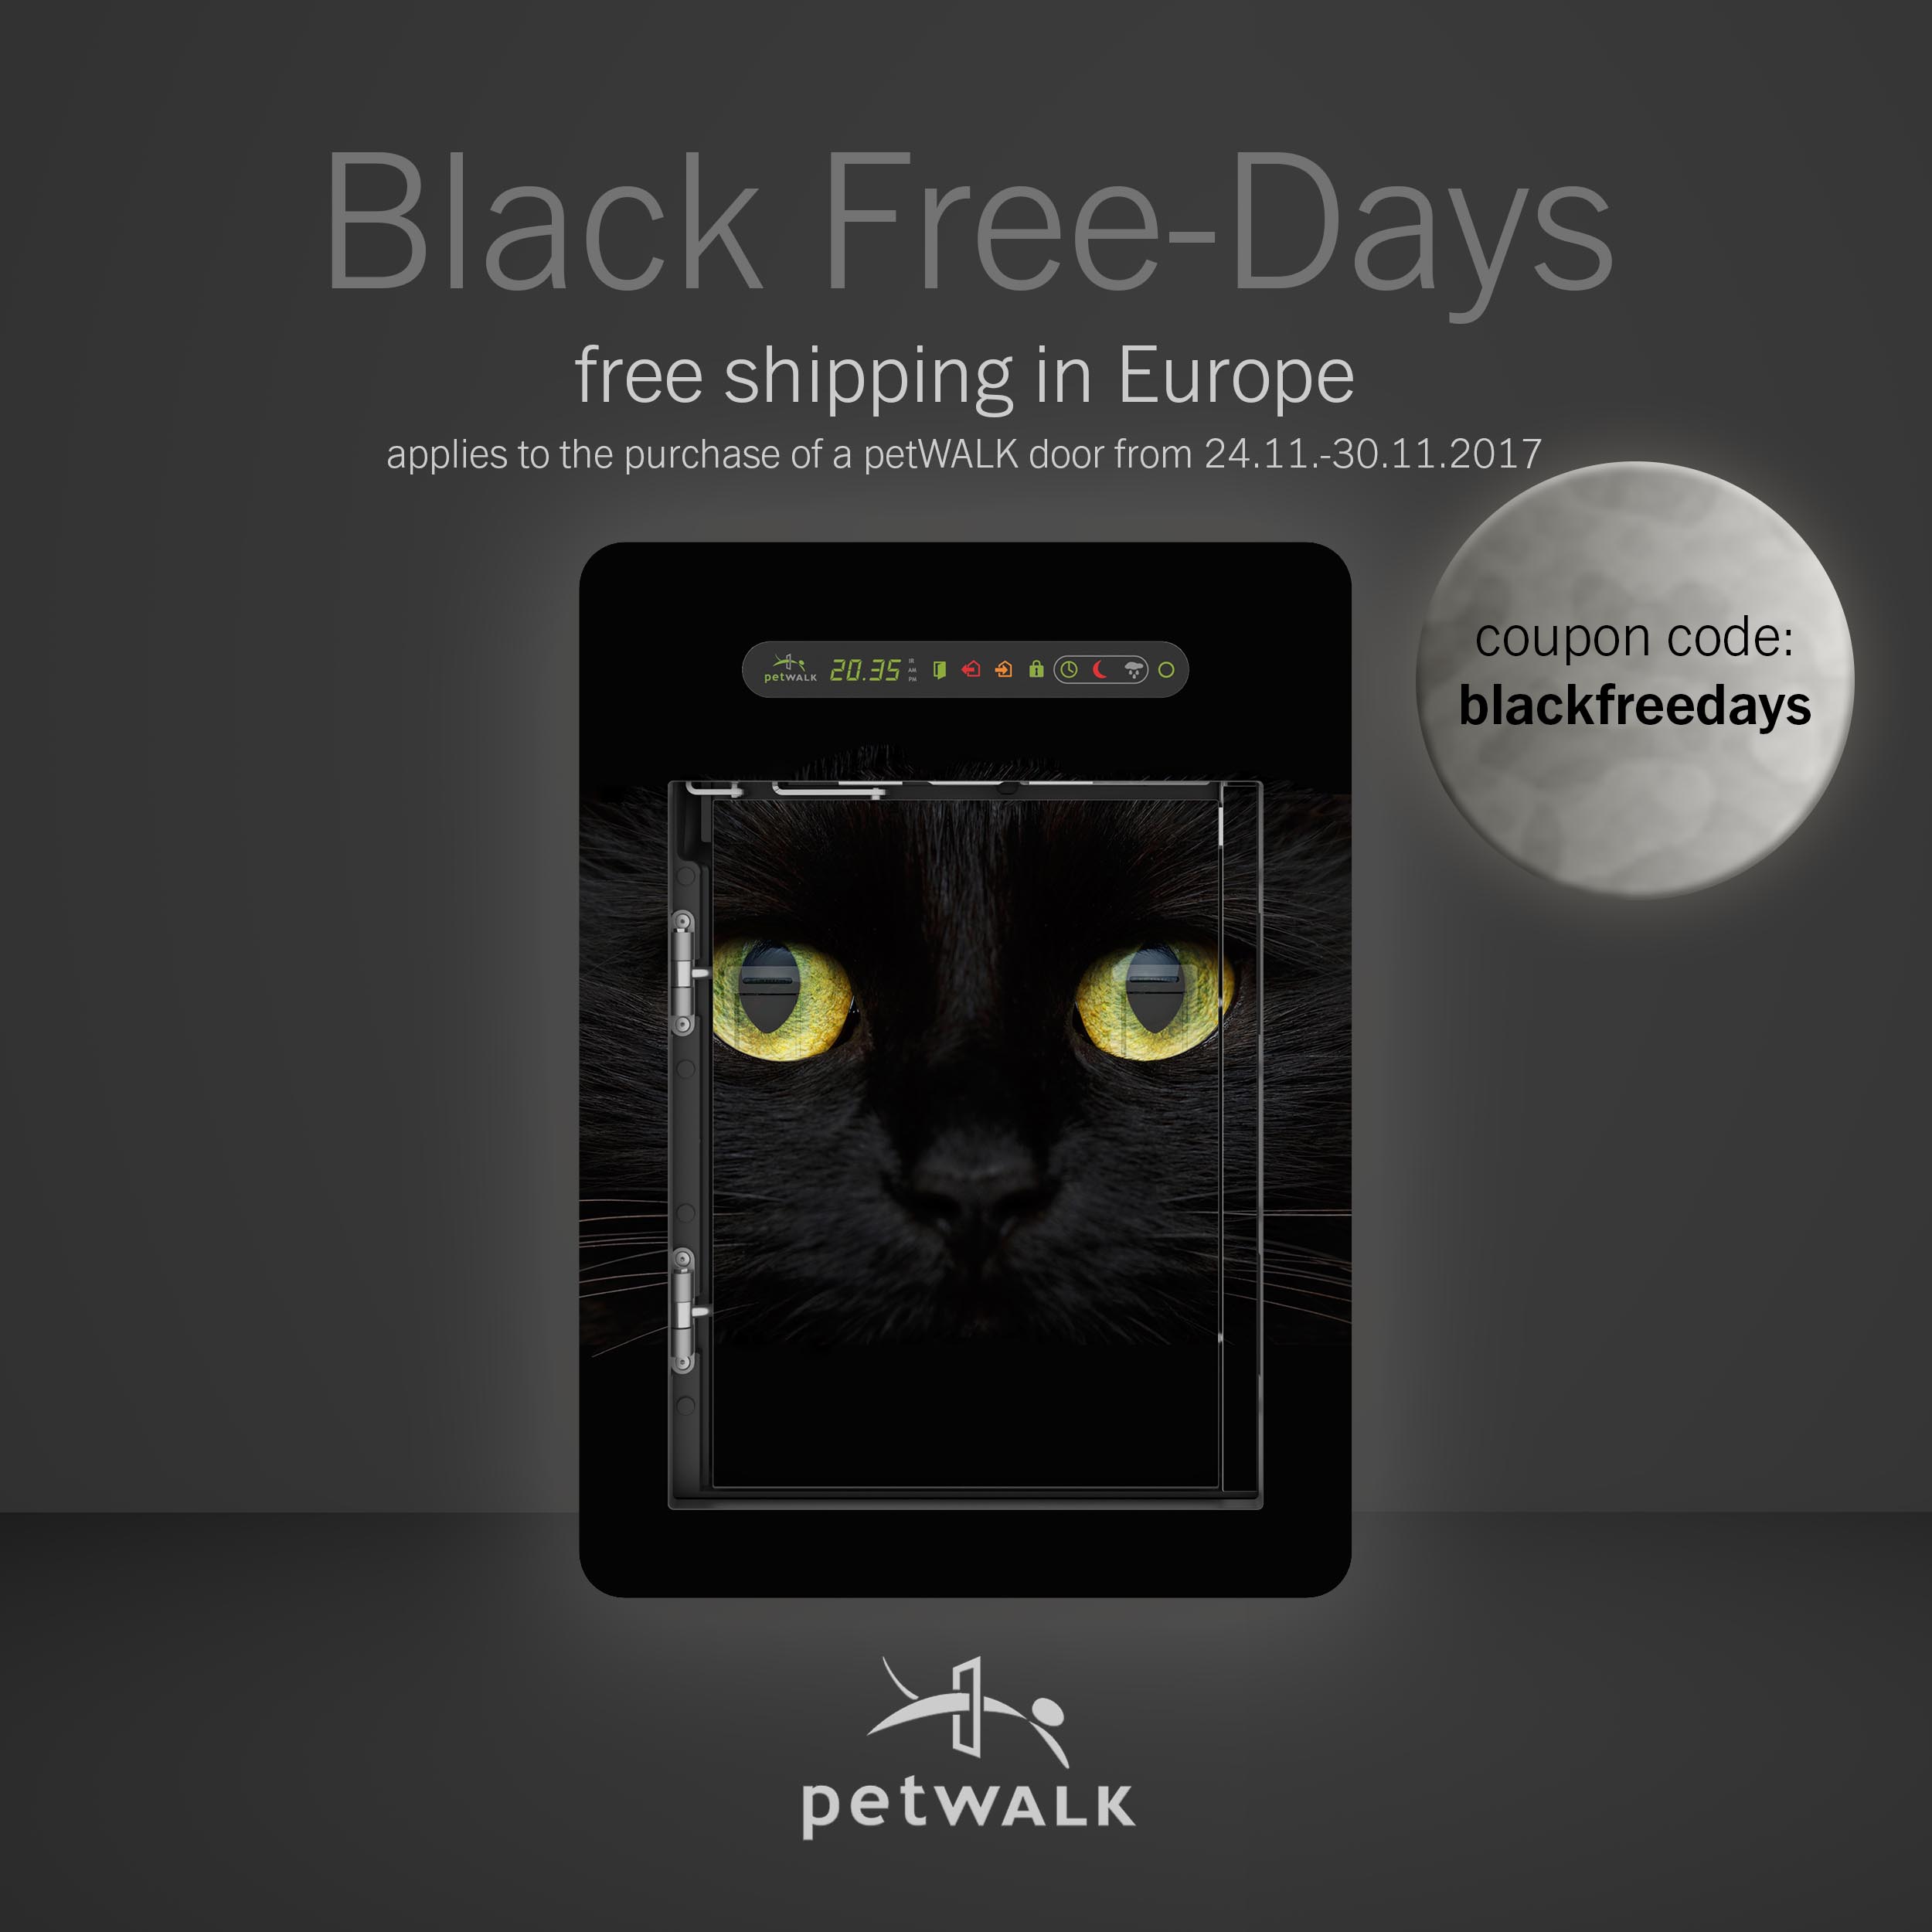 Use the code 'blackfreedays' to save on shipping costs in Europe.